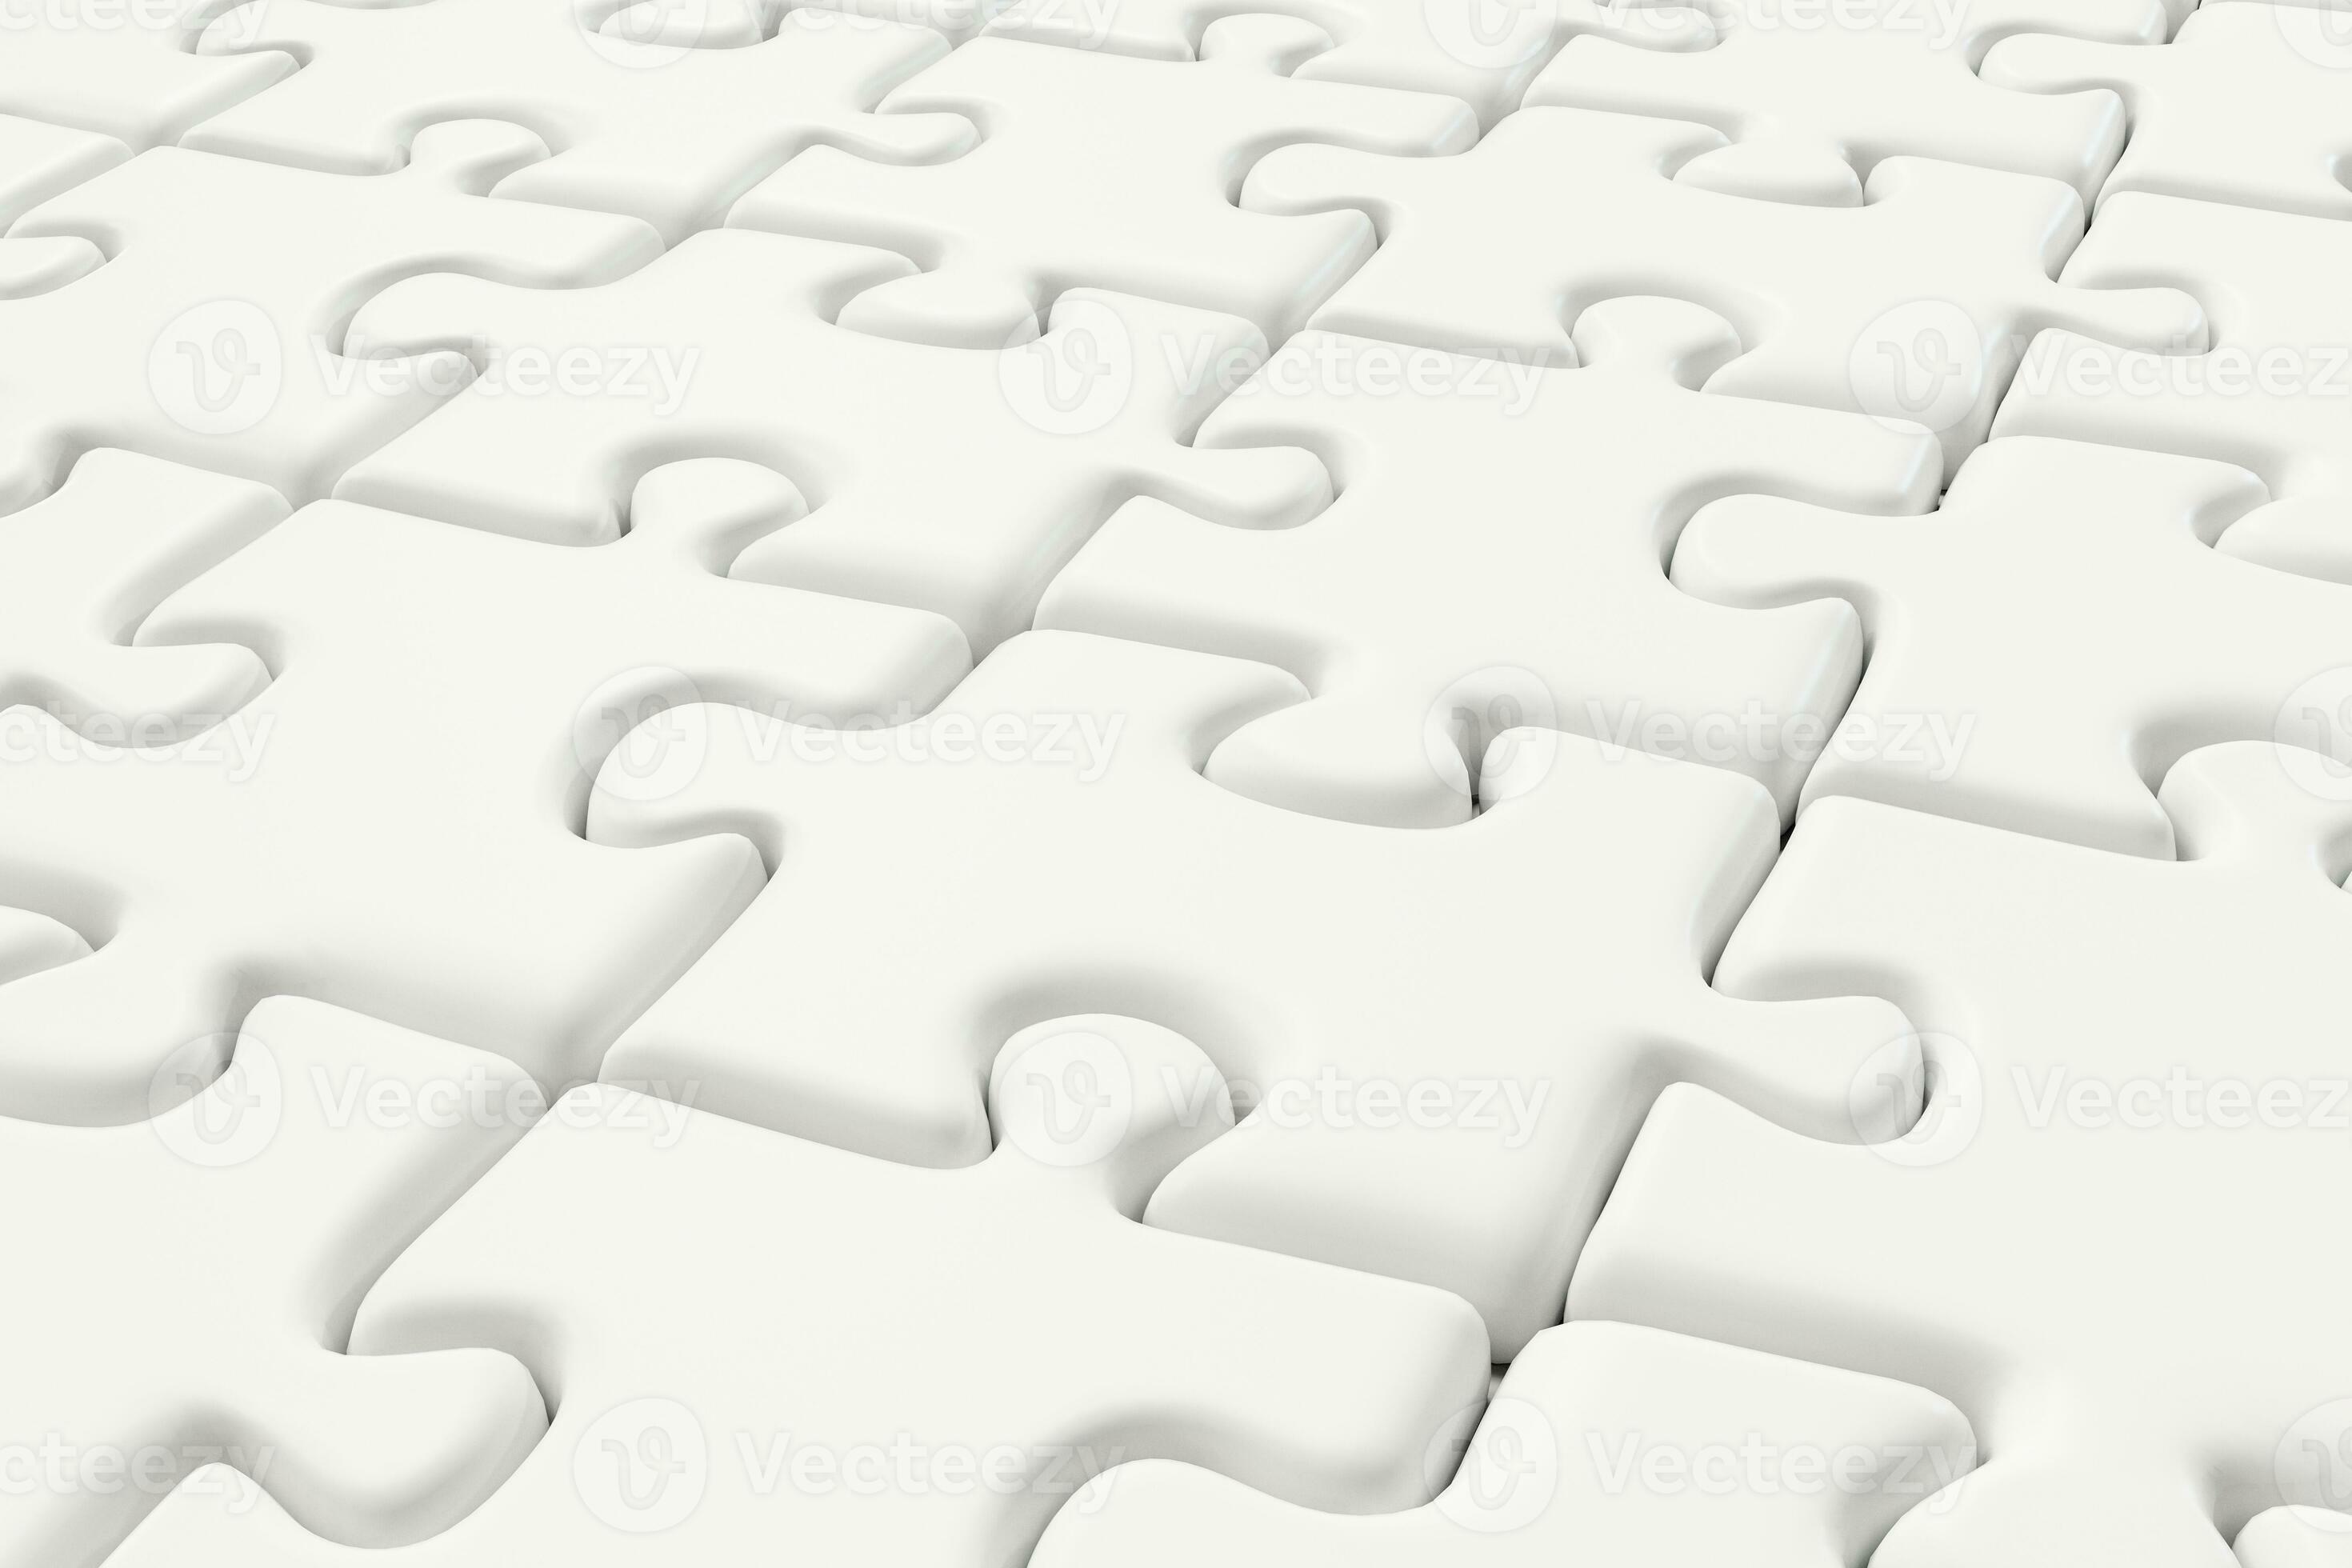 Blank Puzzles Arranged Neatly With White Background 3d Rendering